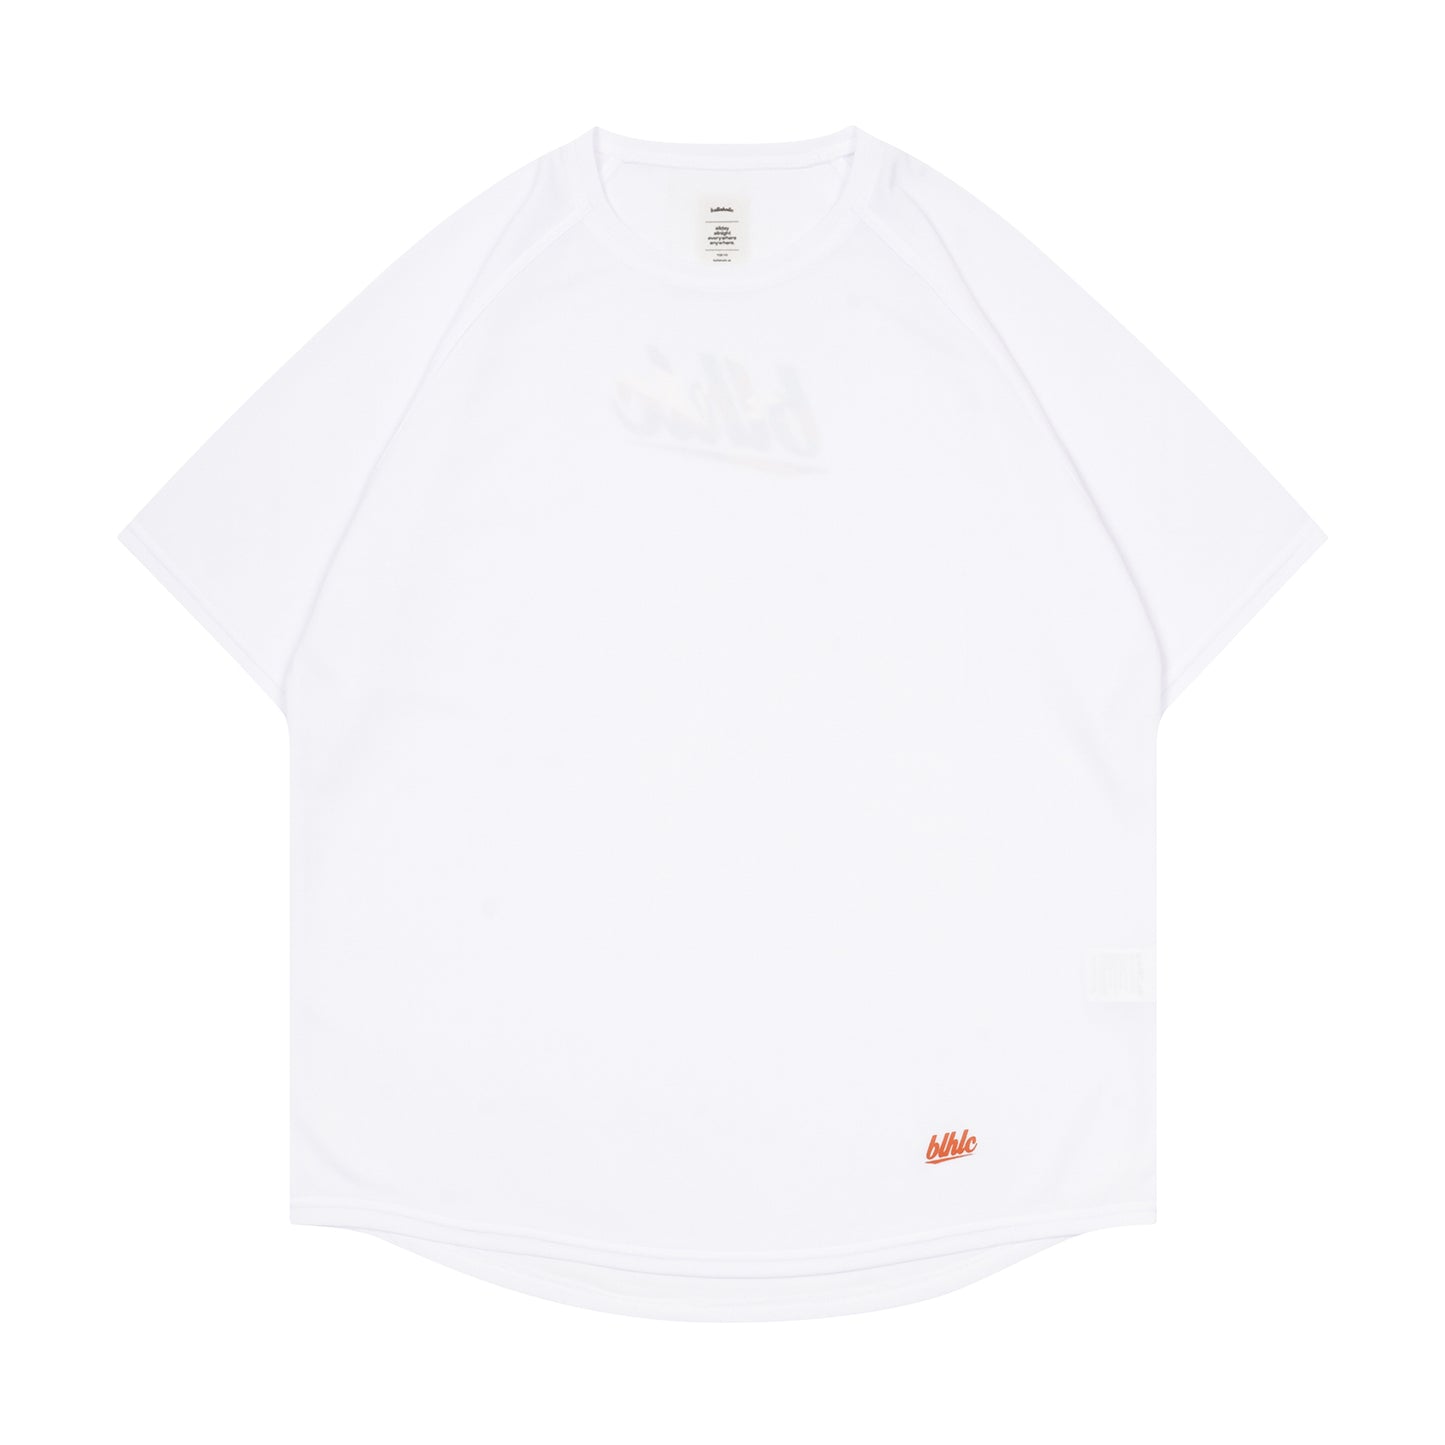 blhlc Back Print Cool Tee (white/east)